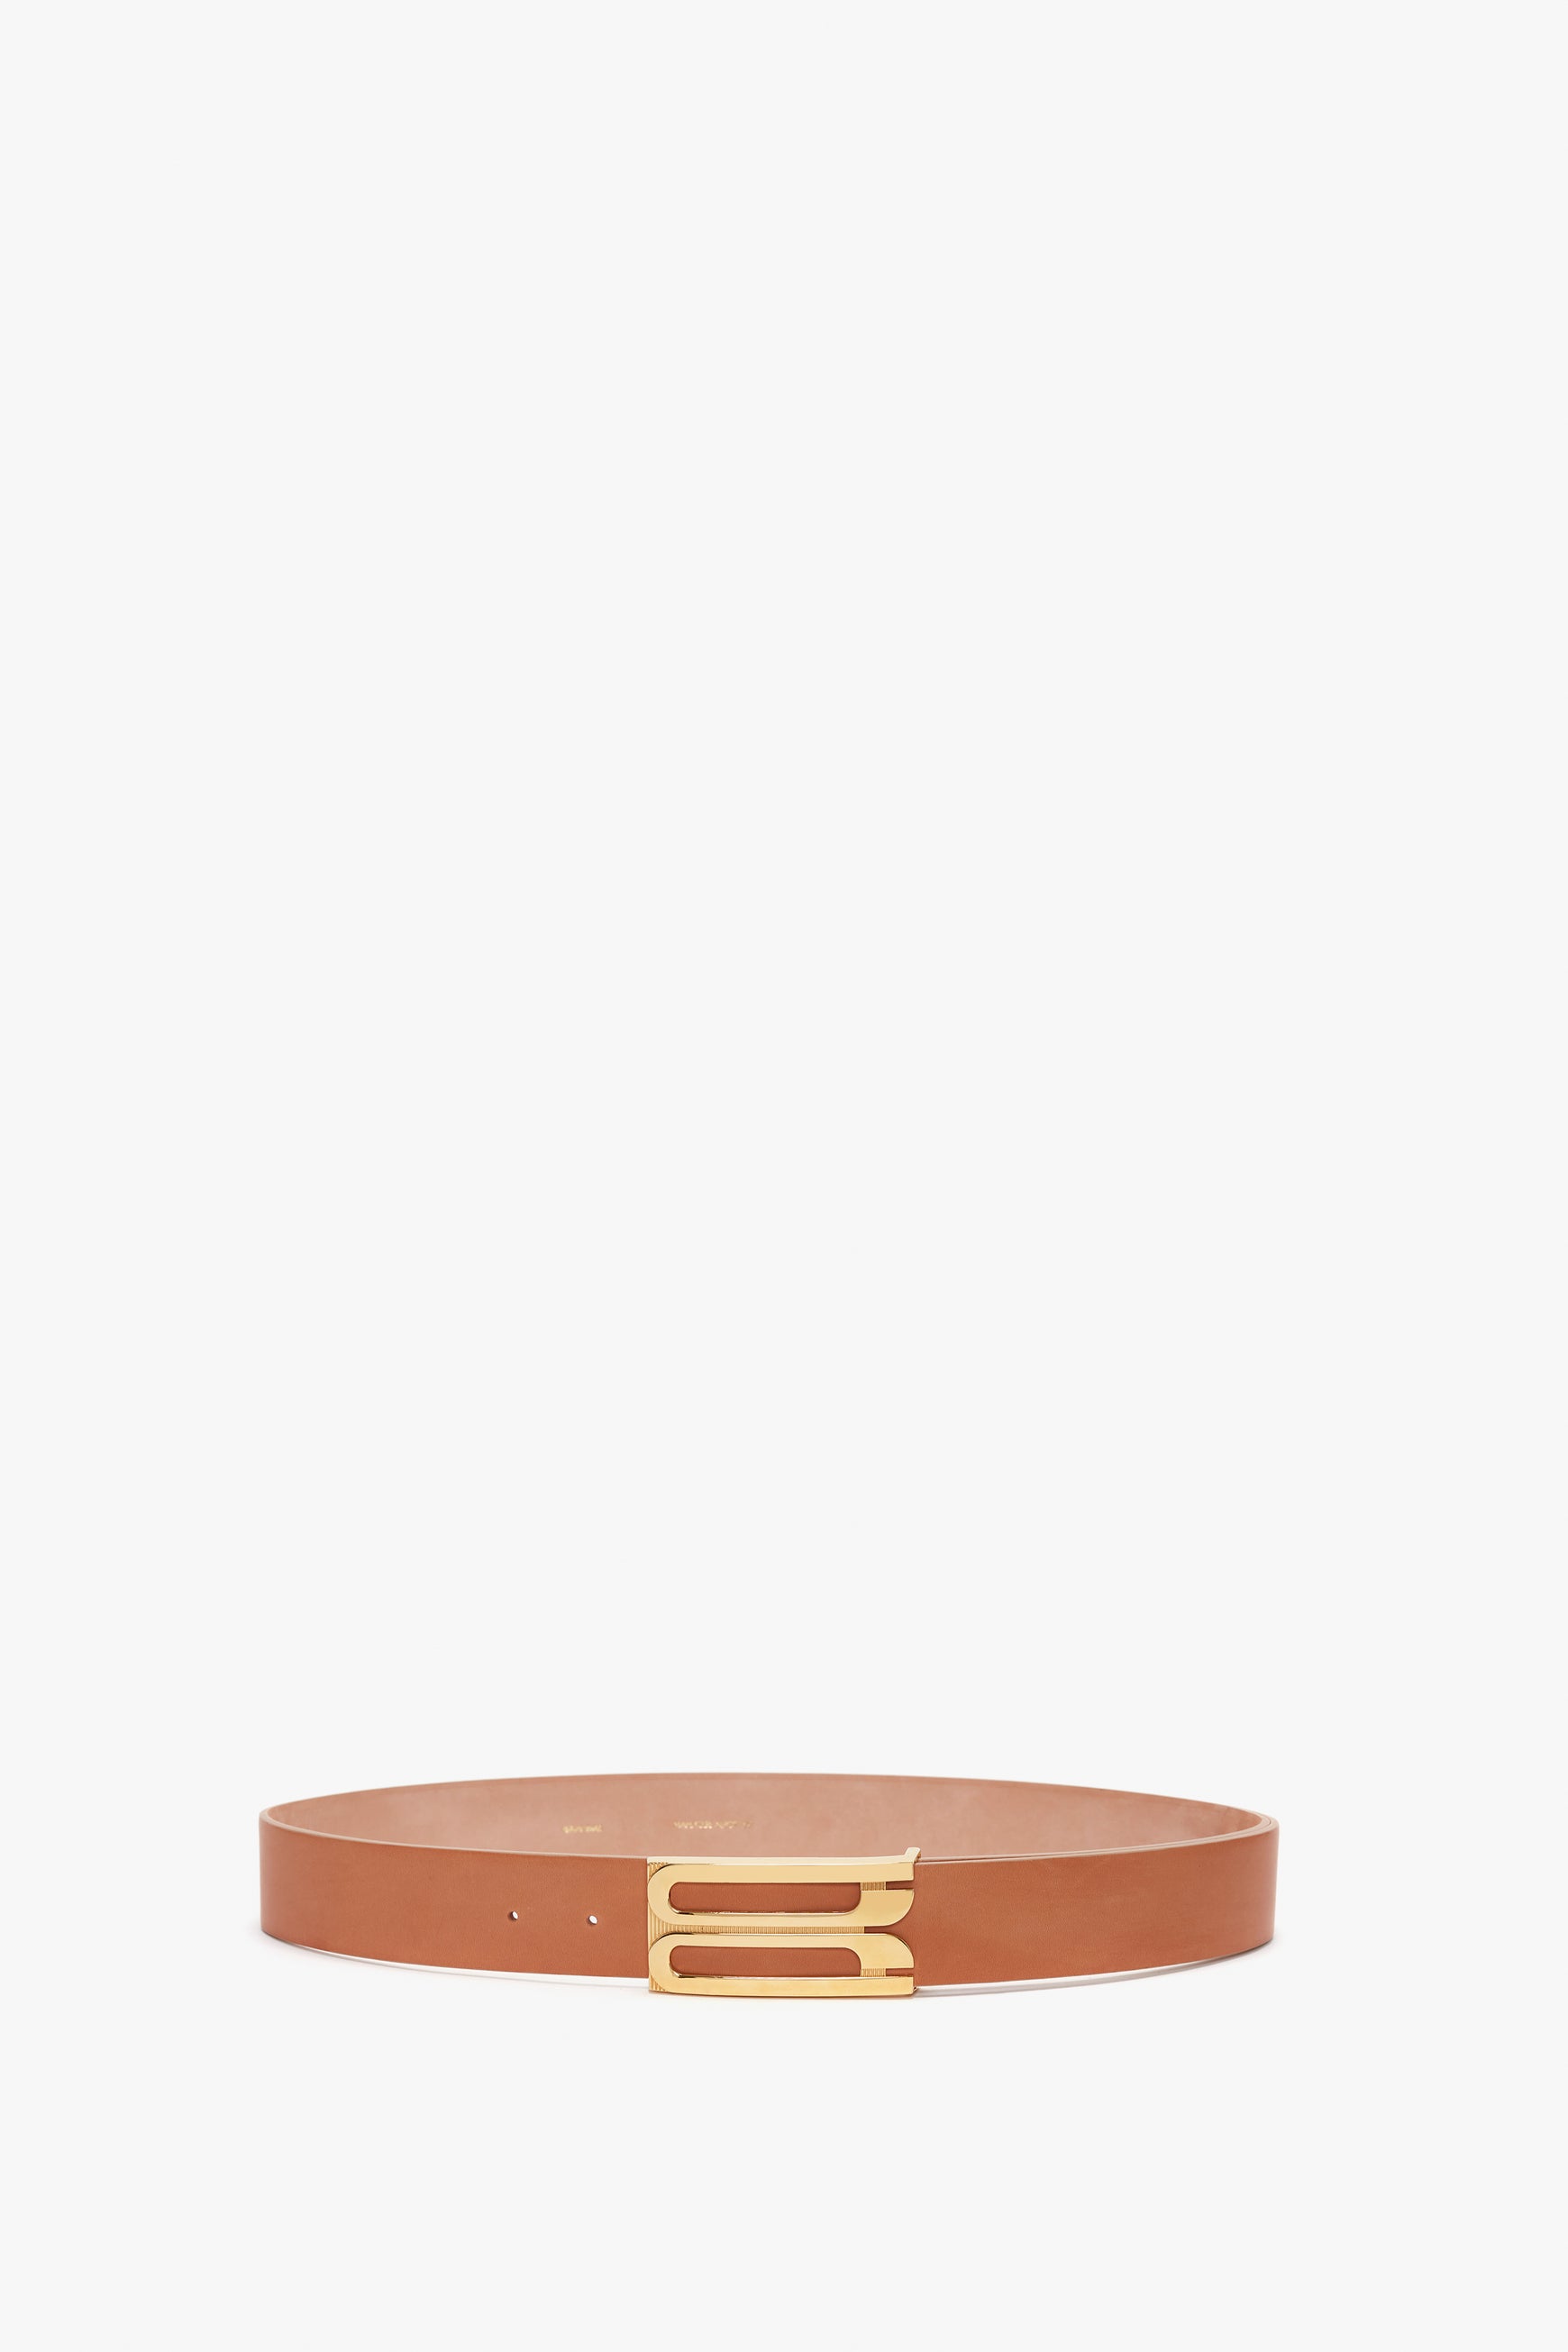 Exclusive Jumbo Frame Belt In Nude Leather – Victoria Beckham